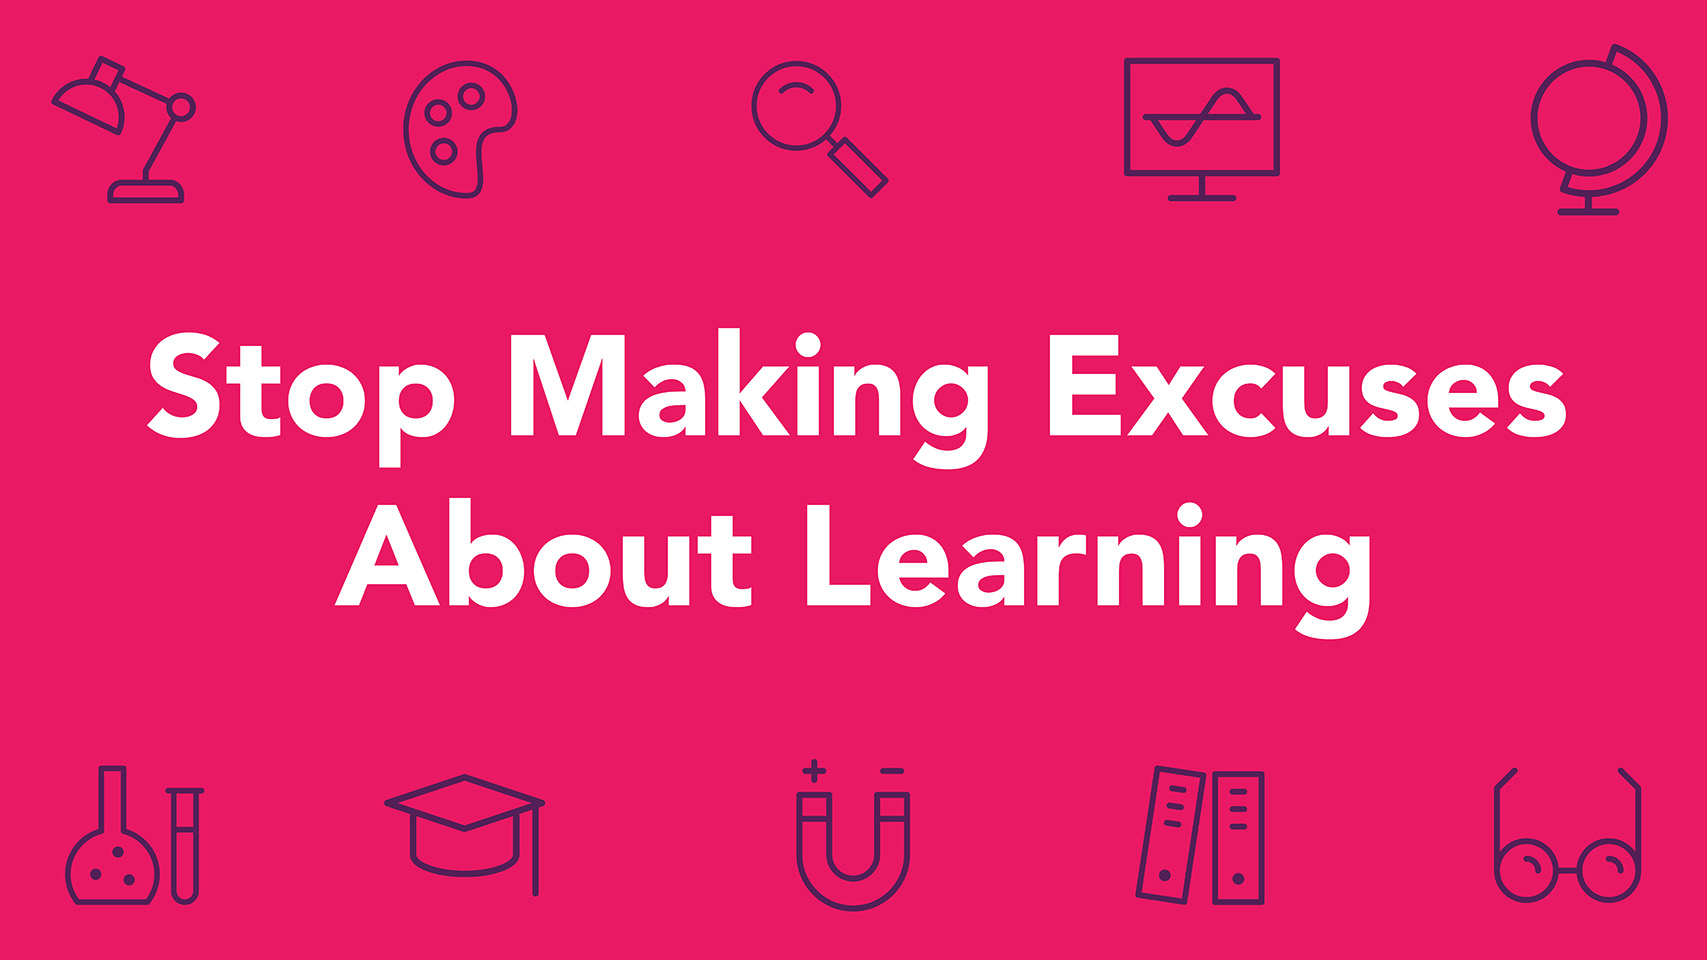 Excuses About Learning cover - academic icons on pink background